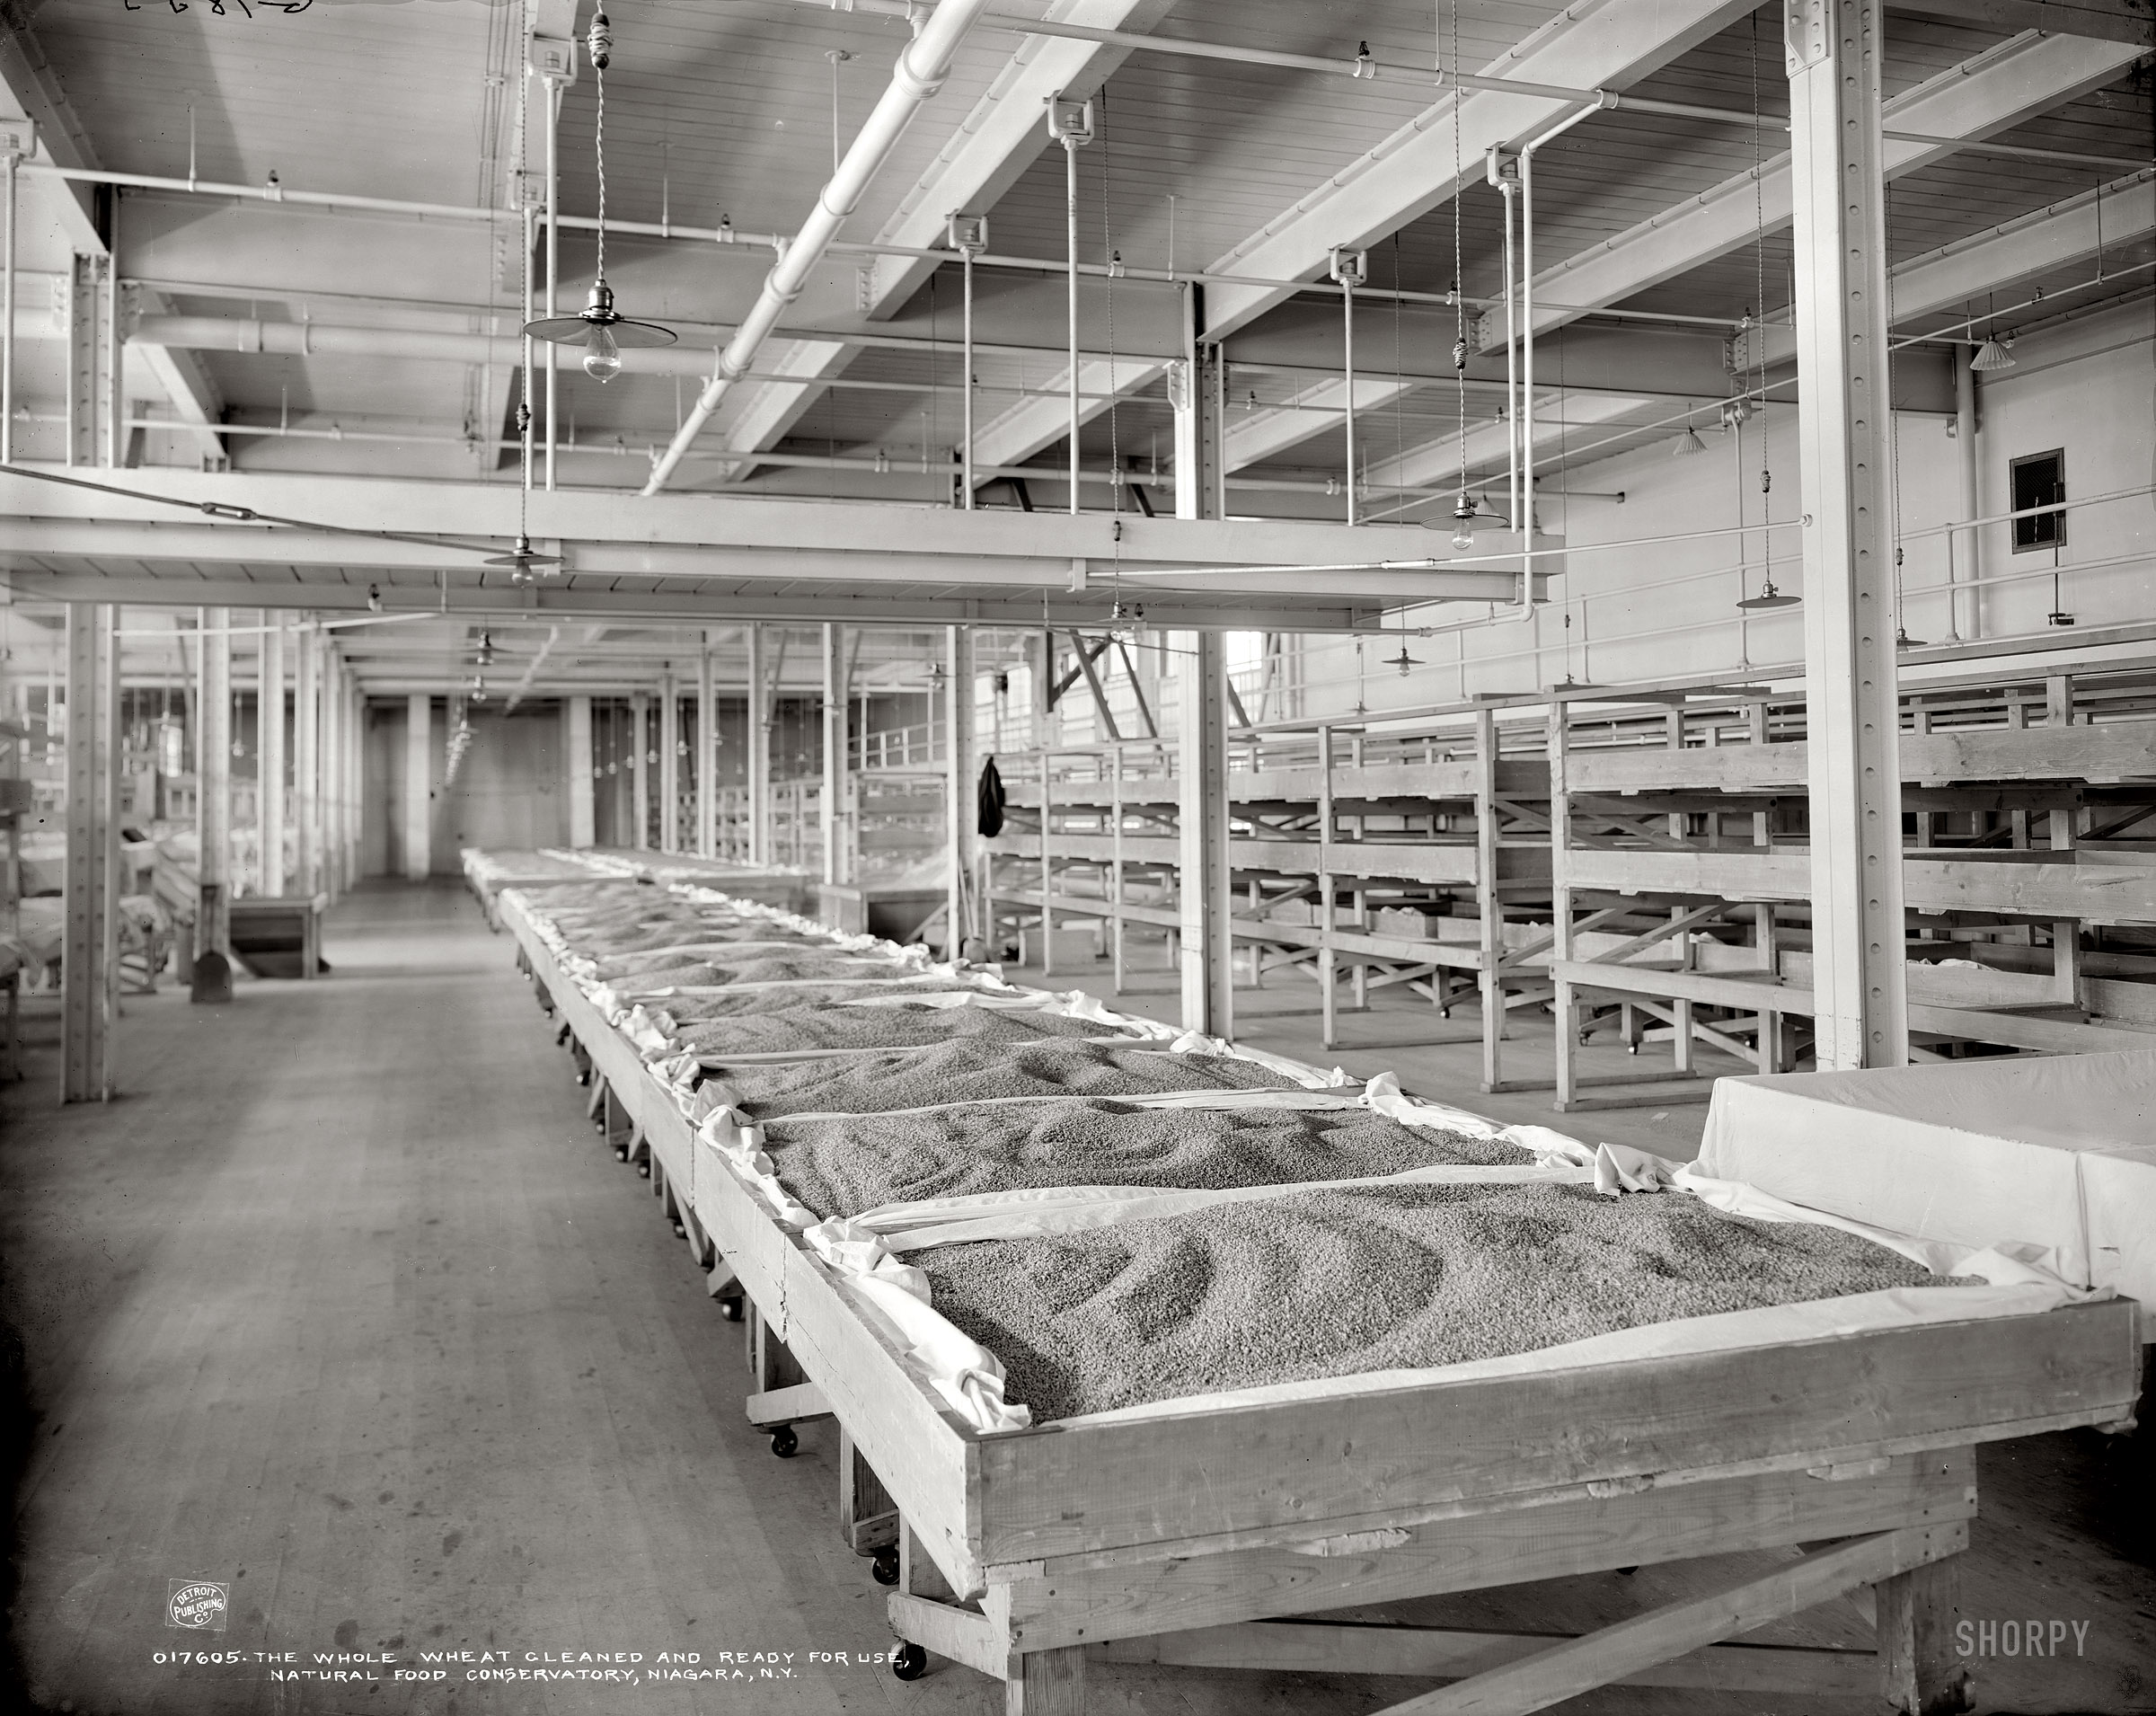 Niagara Falls, New York, circa 1906. "Natural Food Conservatory. The whole wheat cleaned and ready for use." Incipient Shredded Wheat. 8x10 inch dry plate glass negative, Detroit Publishing Company. View full size.